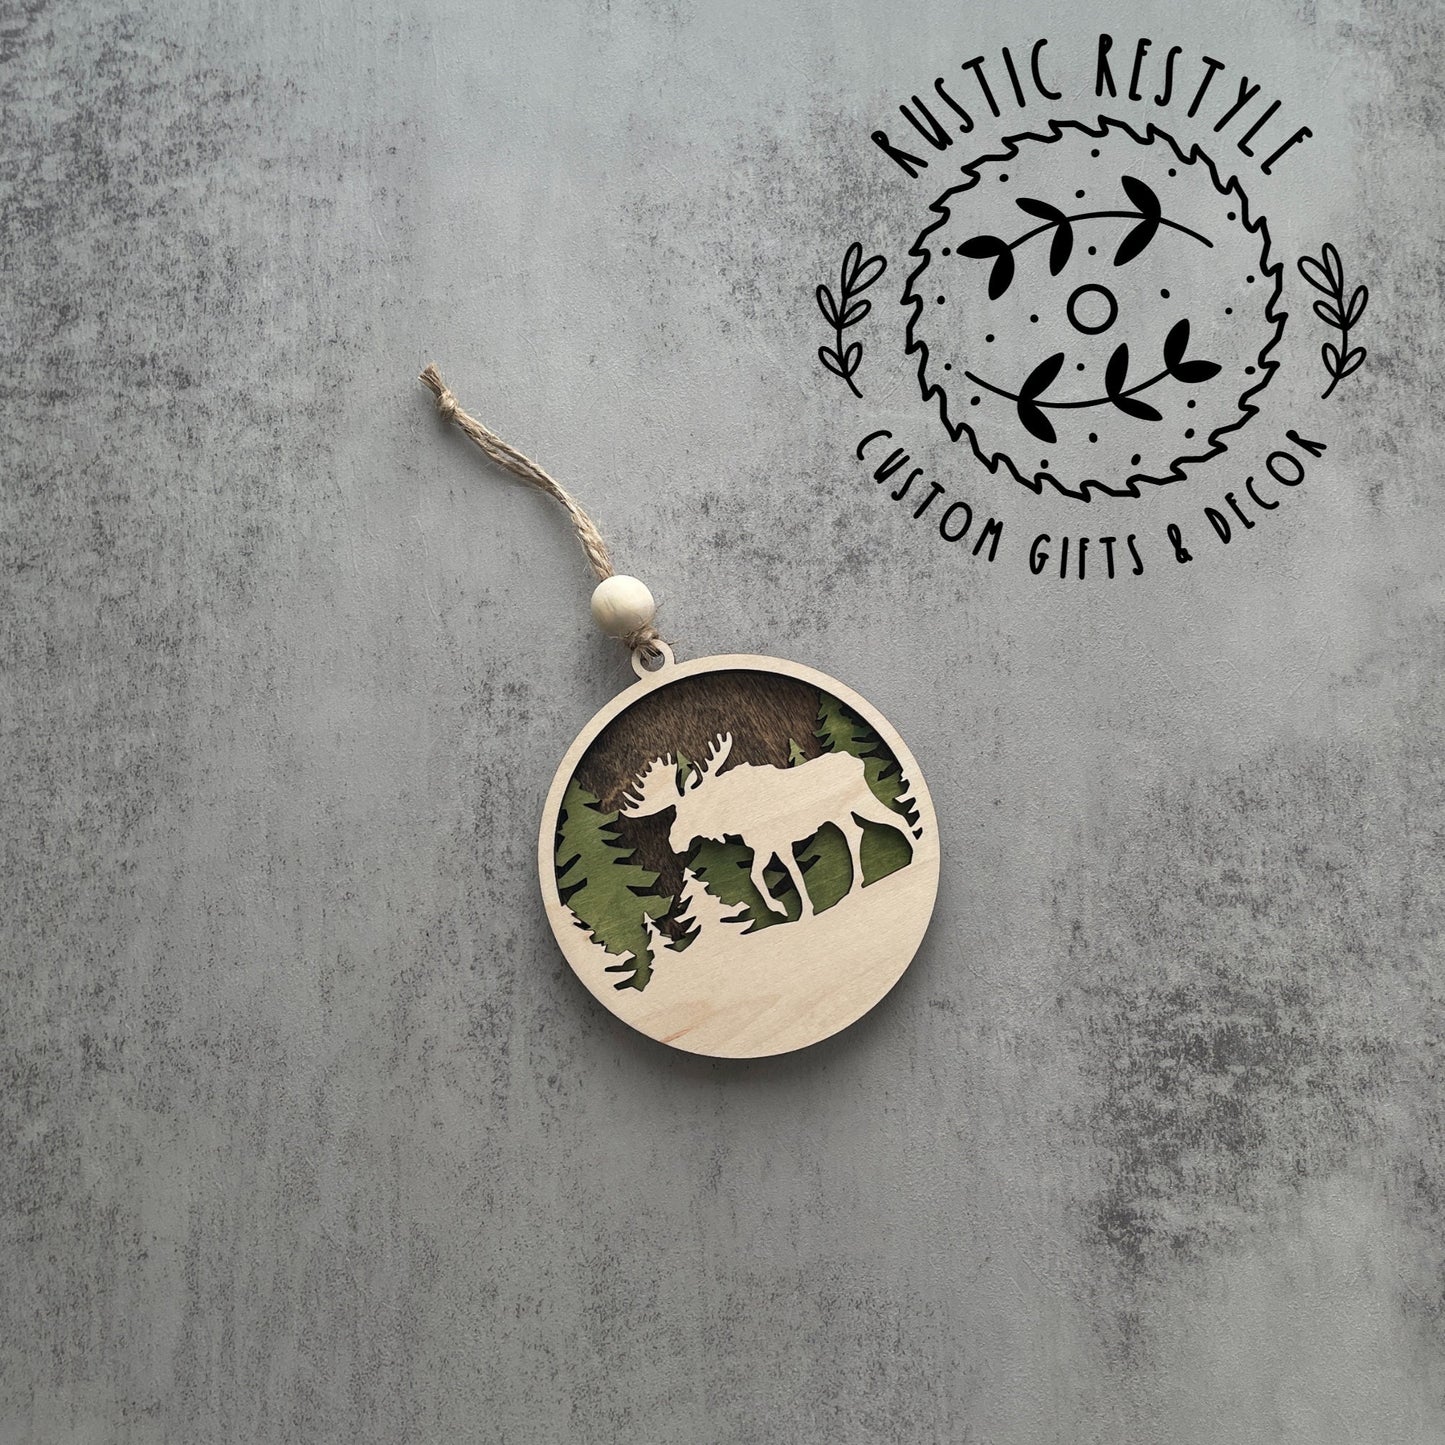 Moose Hunting Ornament, Moose personalized Hunting gift